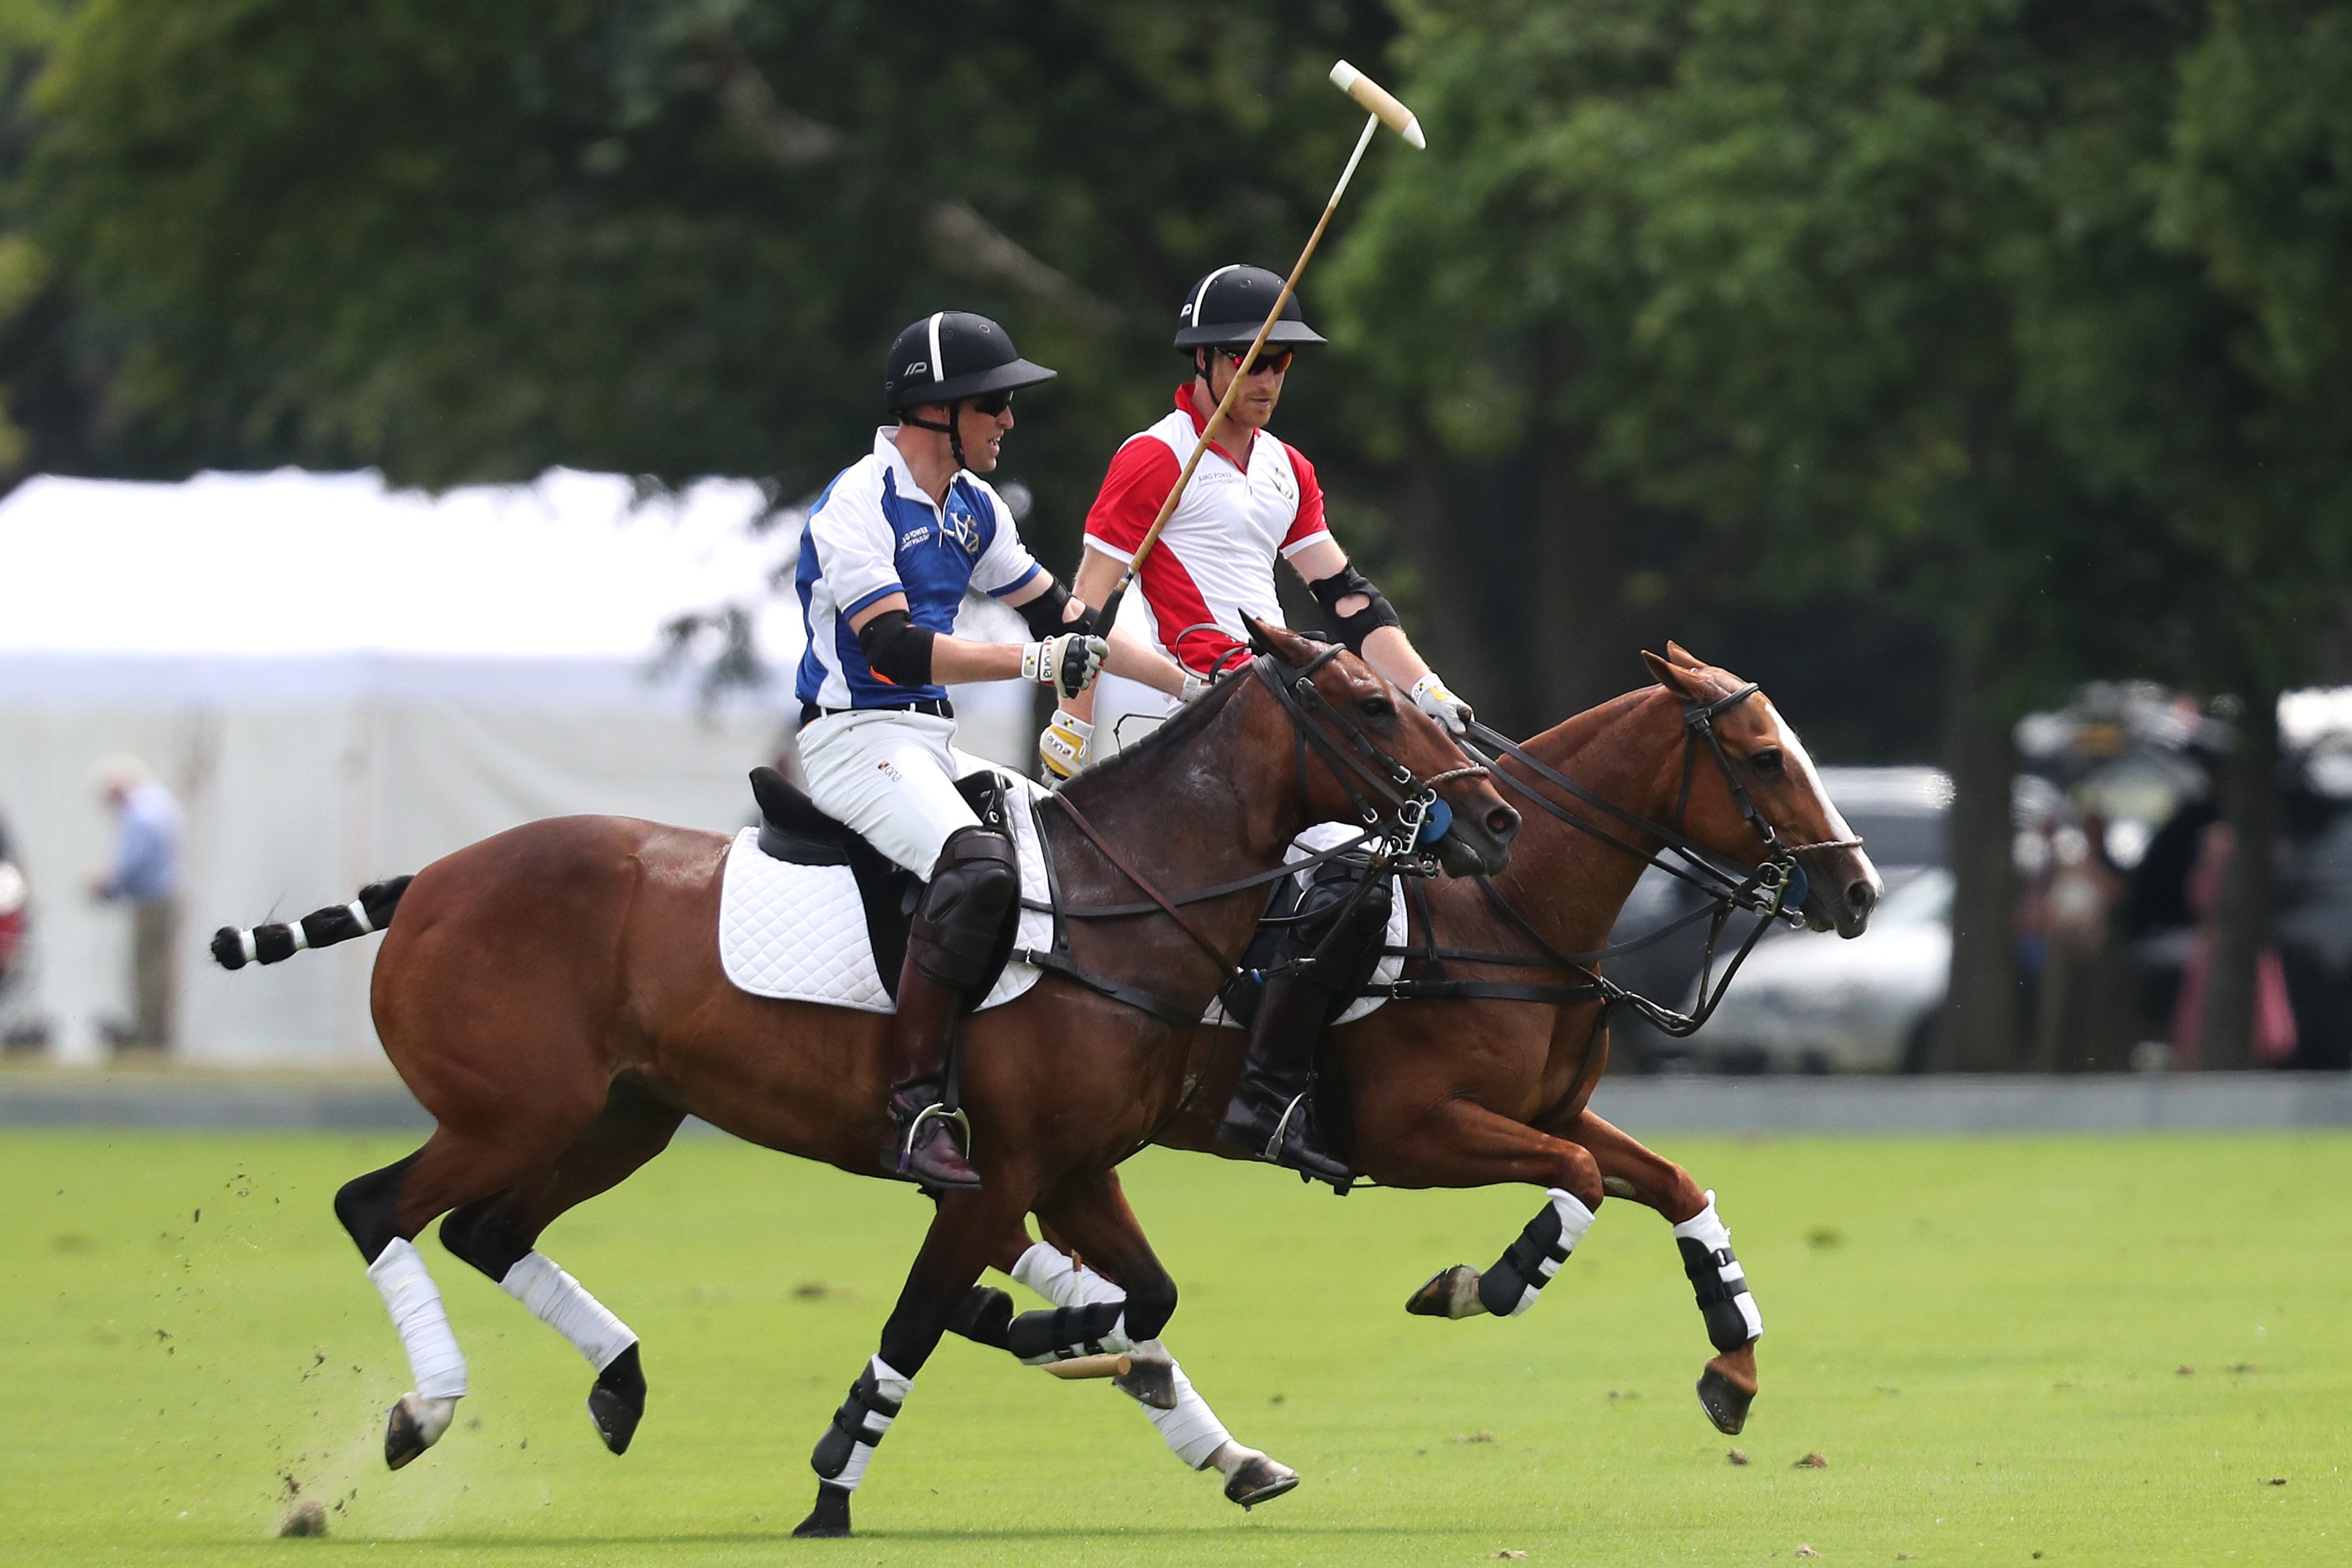 Prince William, Duke of Cambridge and Prince Harry, Duke of Sussex compete at the King Power Royal Charity Polo Day for the Vichai Srivaddhanaprabha Memorial Trophy held at Billingbear Polo Club on July 10, 2019 in Wokingham, England. | Source: Getty Images